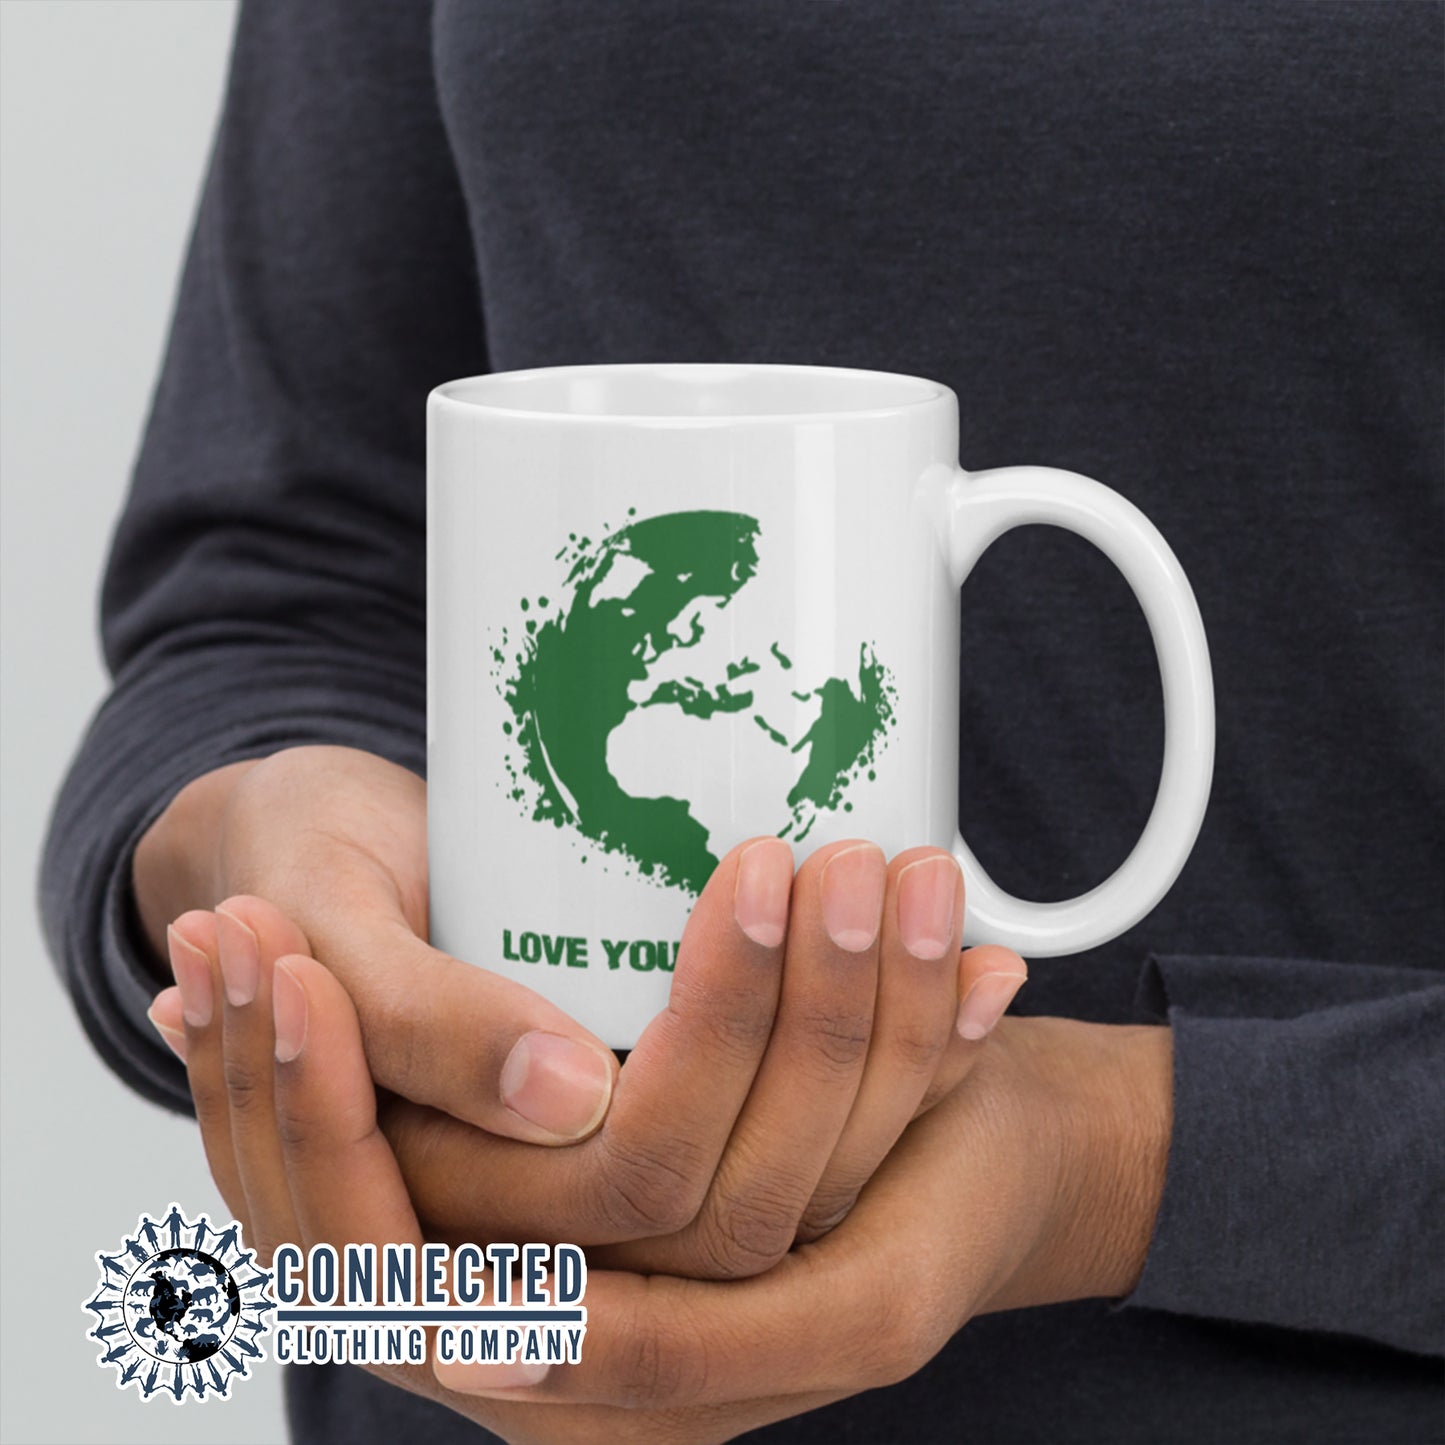 Love Your Mother Earth Classic Mug with green design - sweetsherriloudesigns - 10% of profits donated to the Environmental Defense Fund